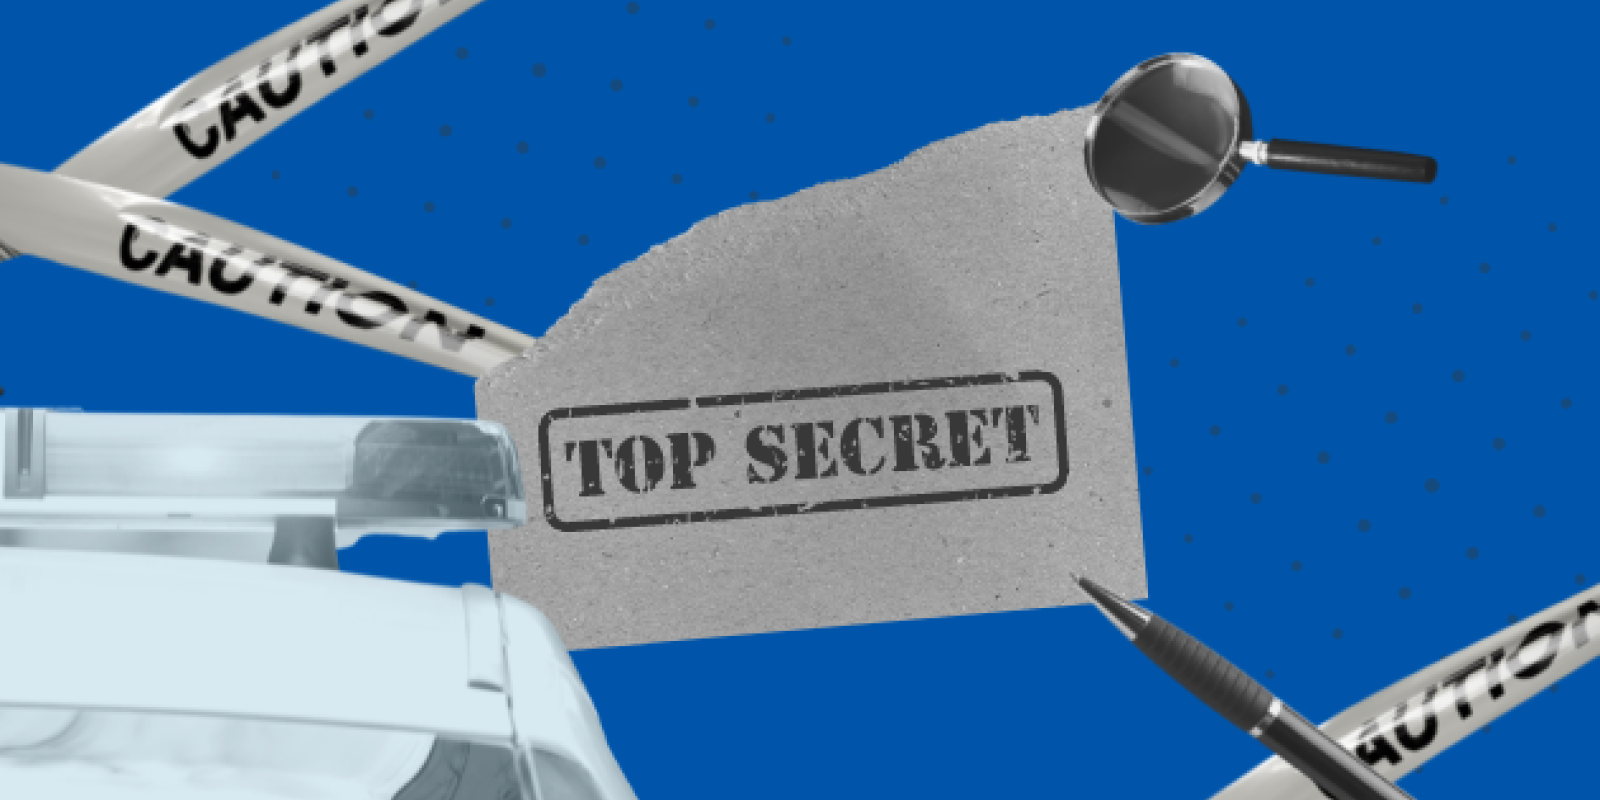 A collage of a police car, caution tape, and a piece of paper stamped with "TOP SECRET" against a blue background